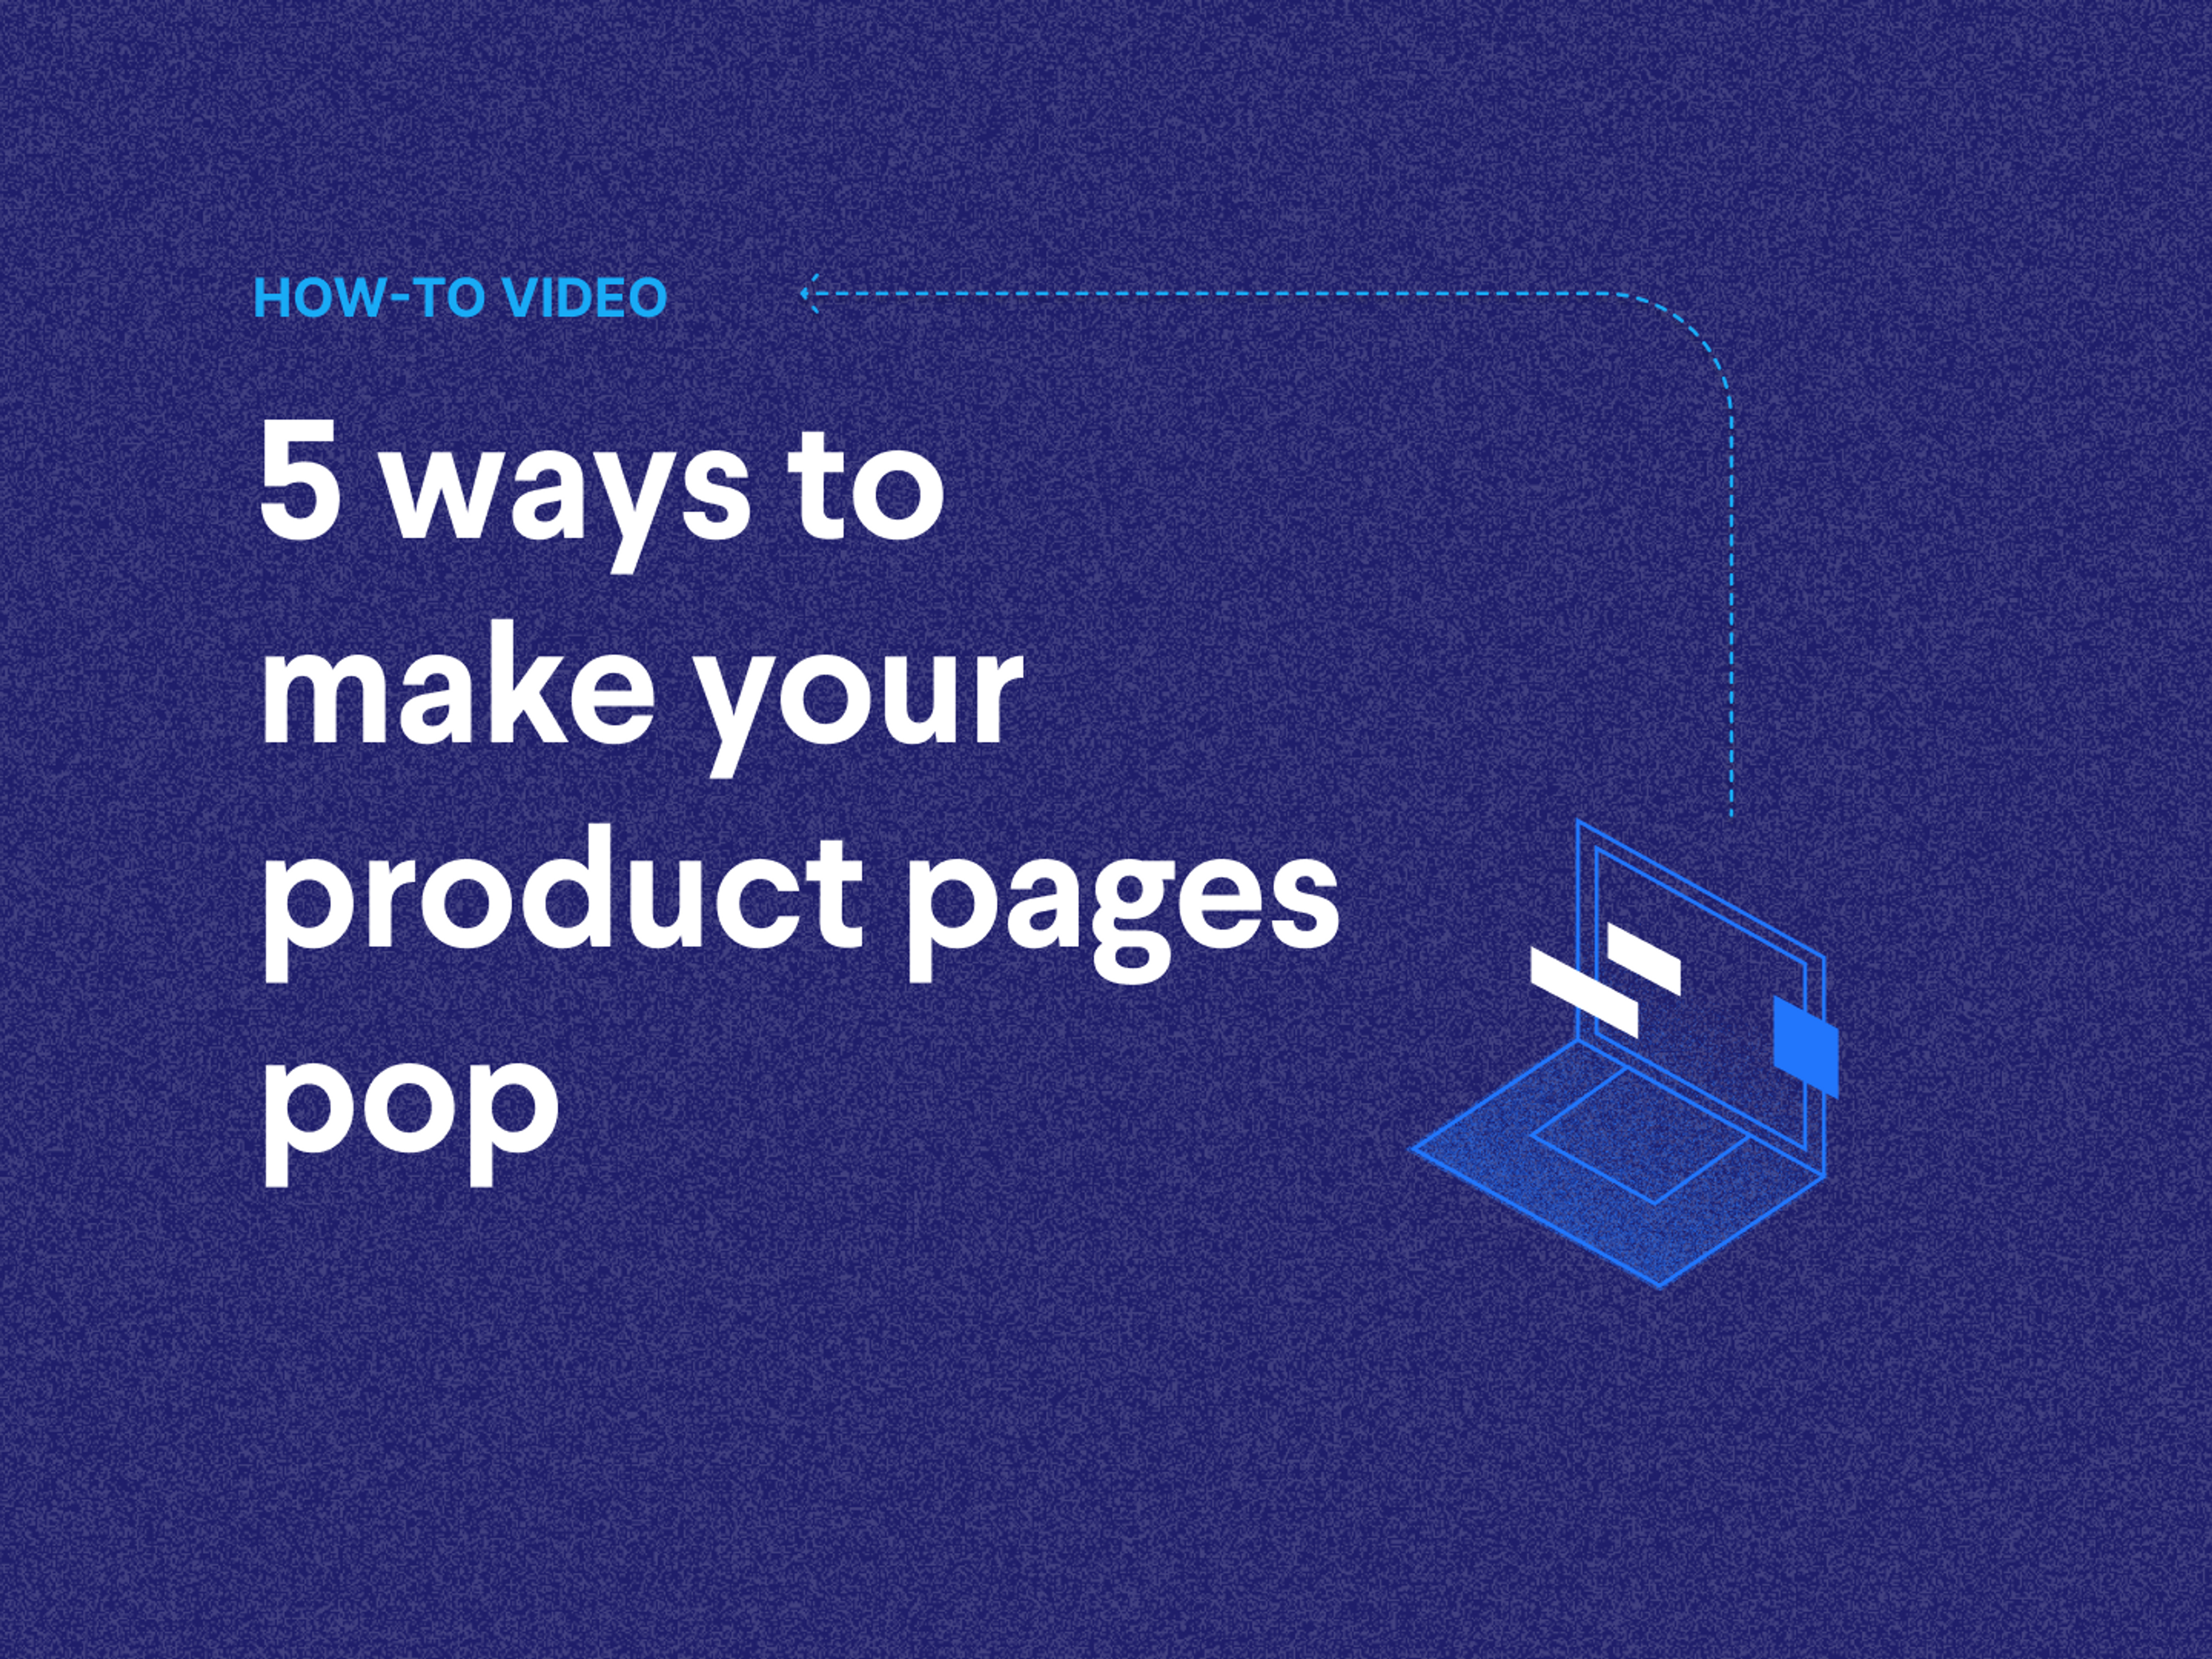 5 ways to make your product pages pop